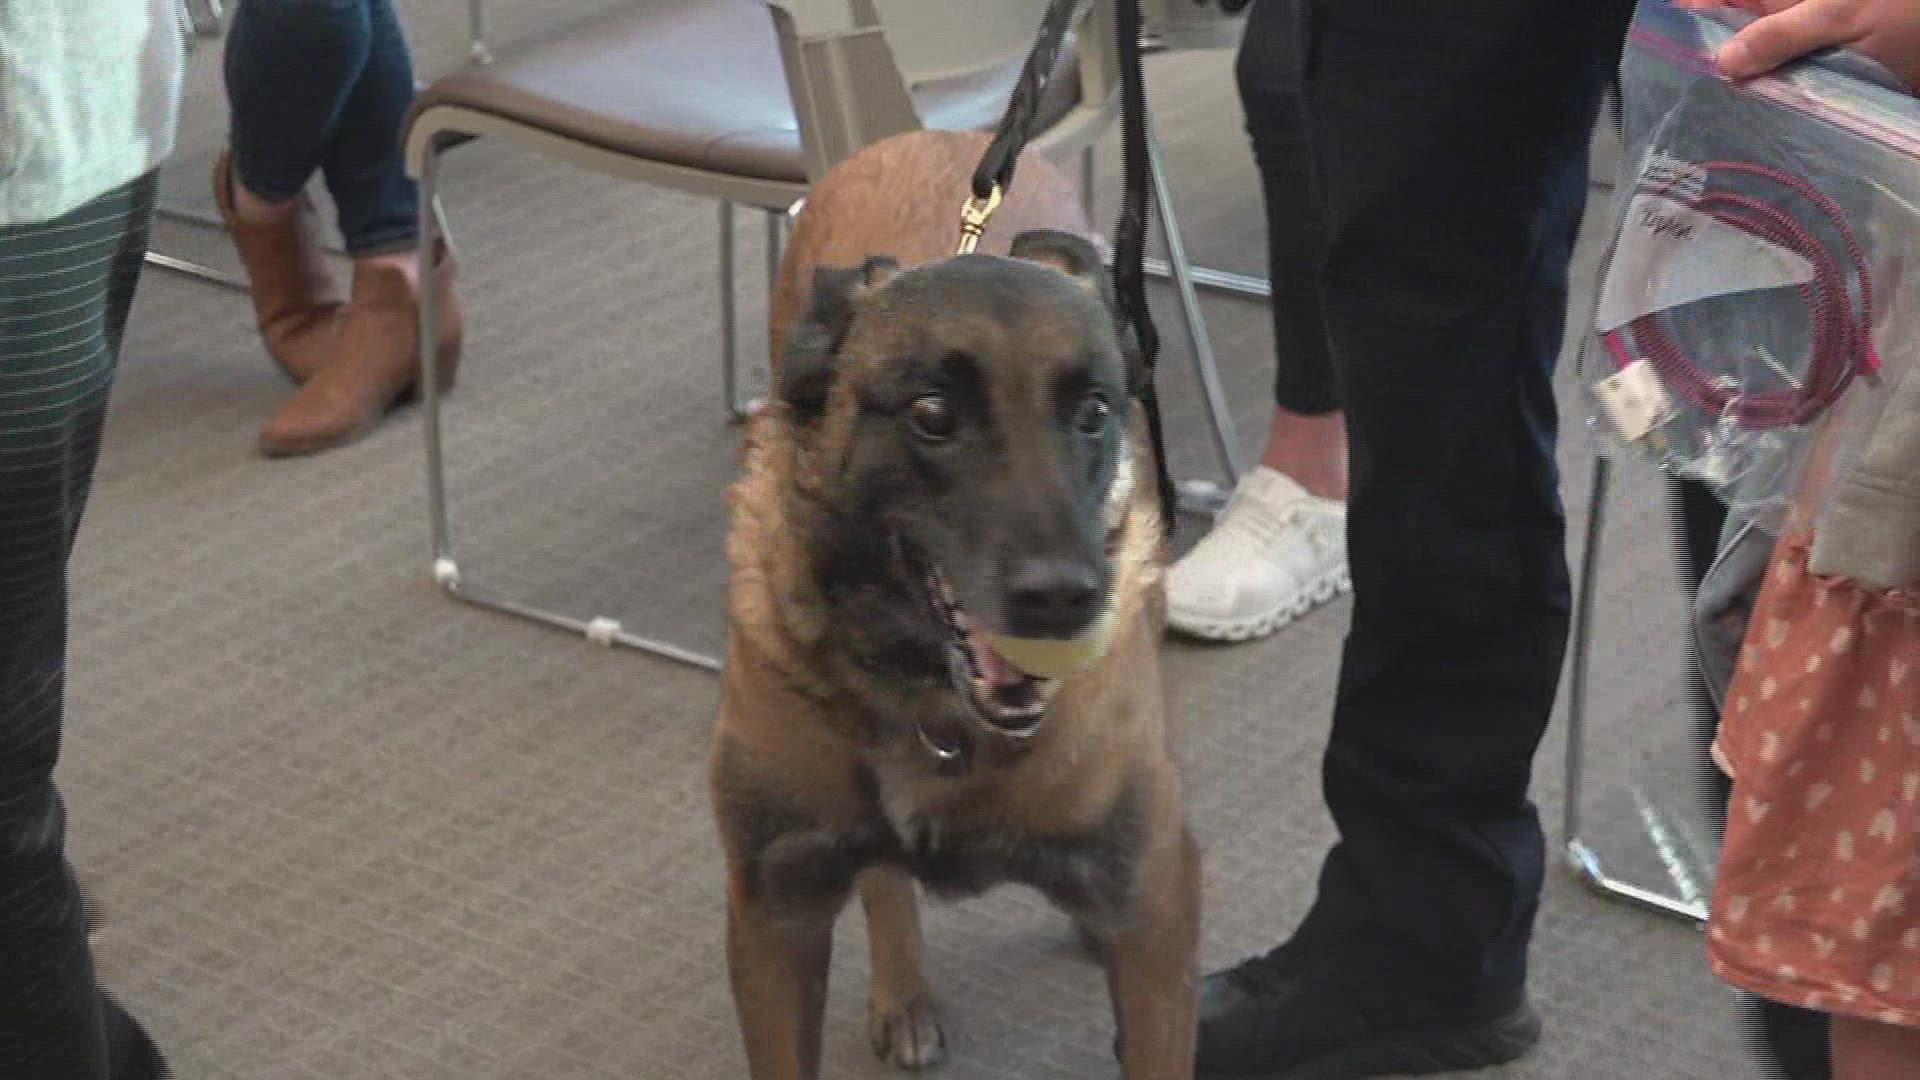 Officer Rico has been on the force for the past eight years.